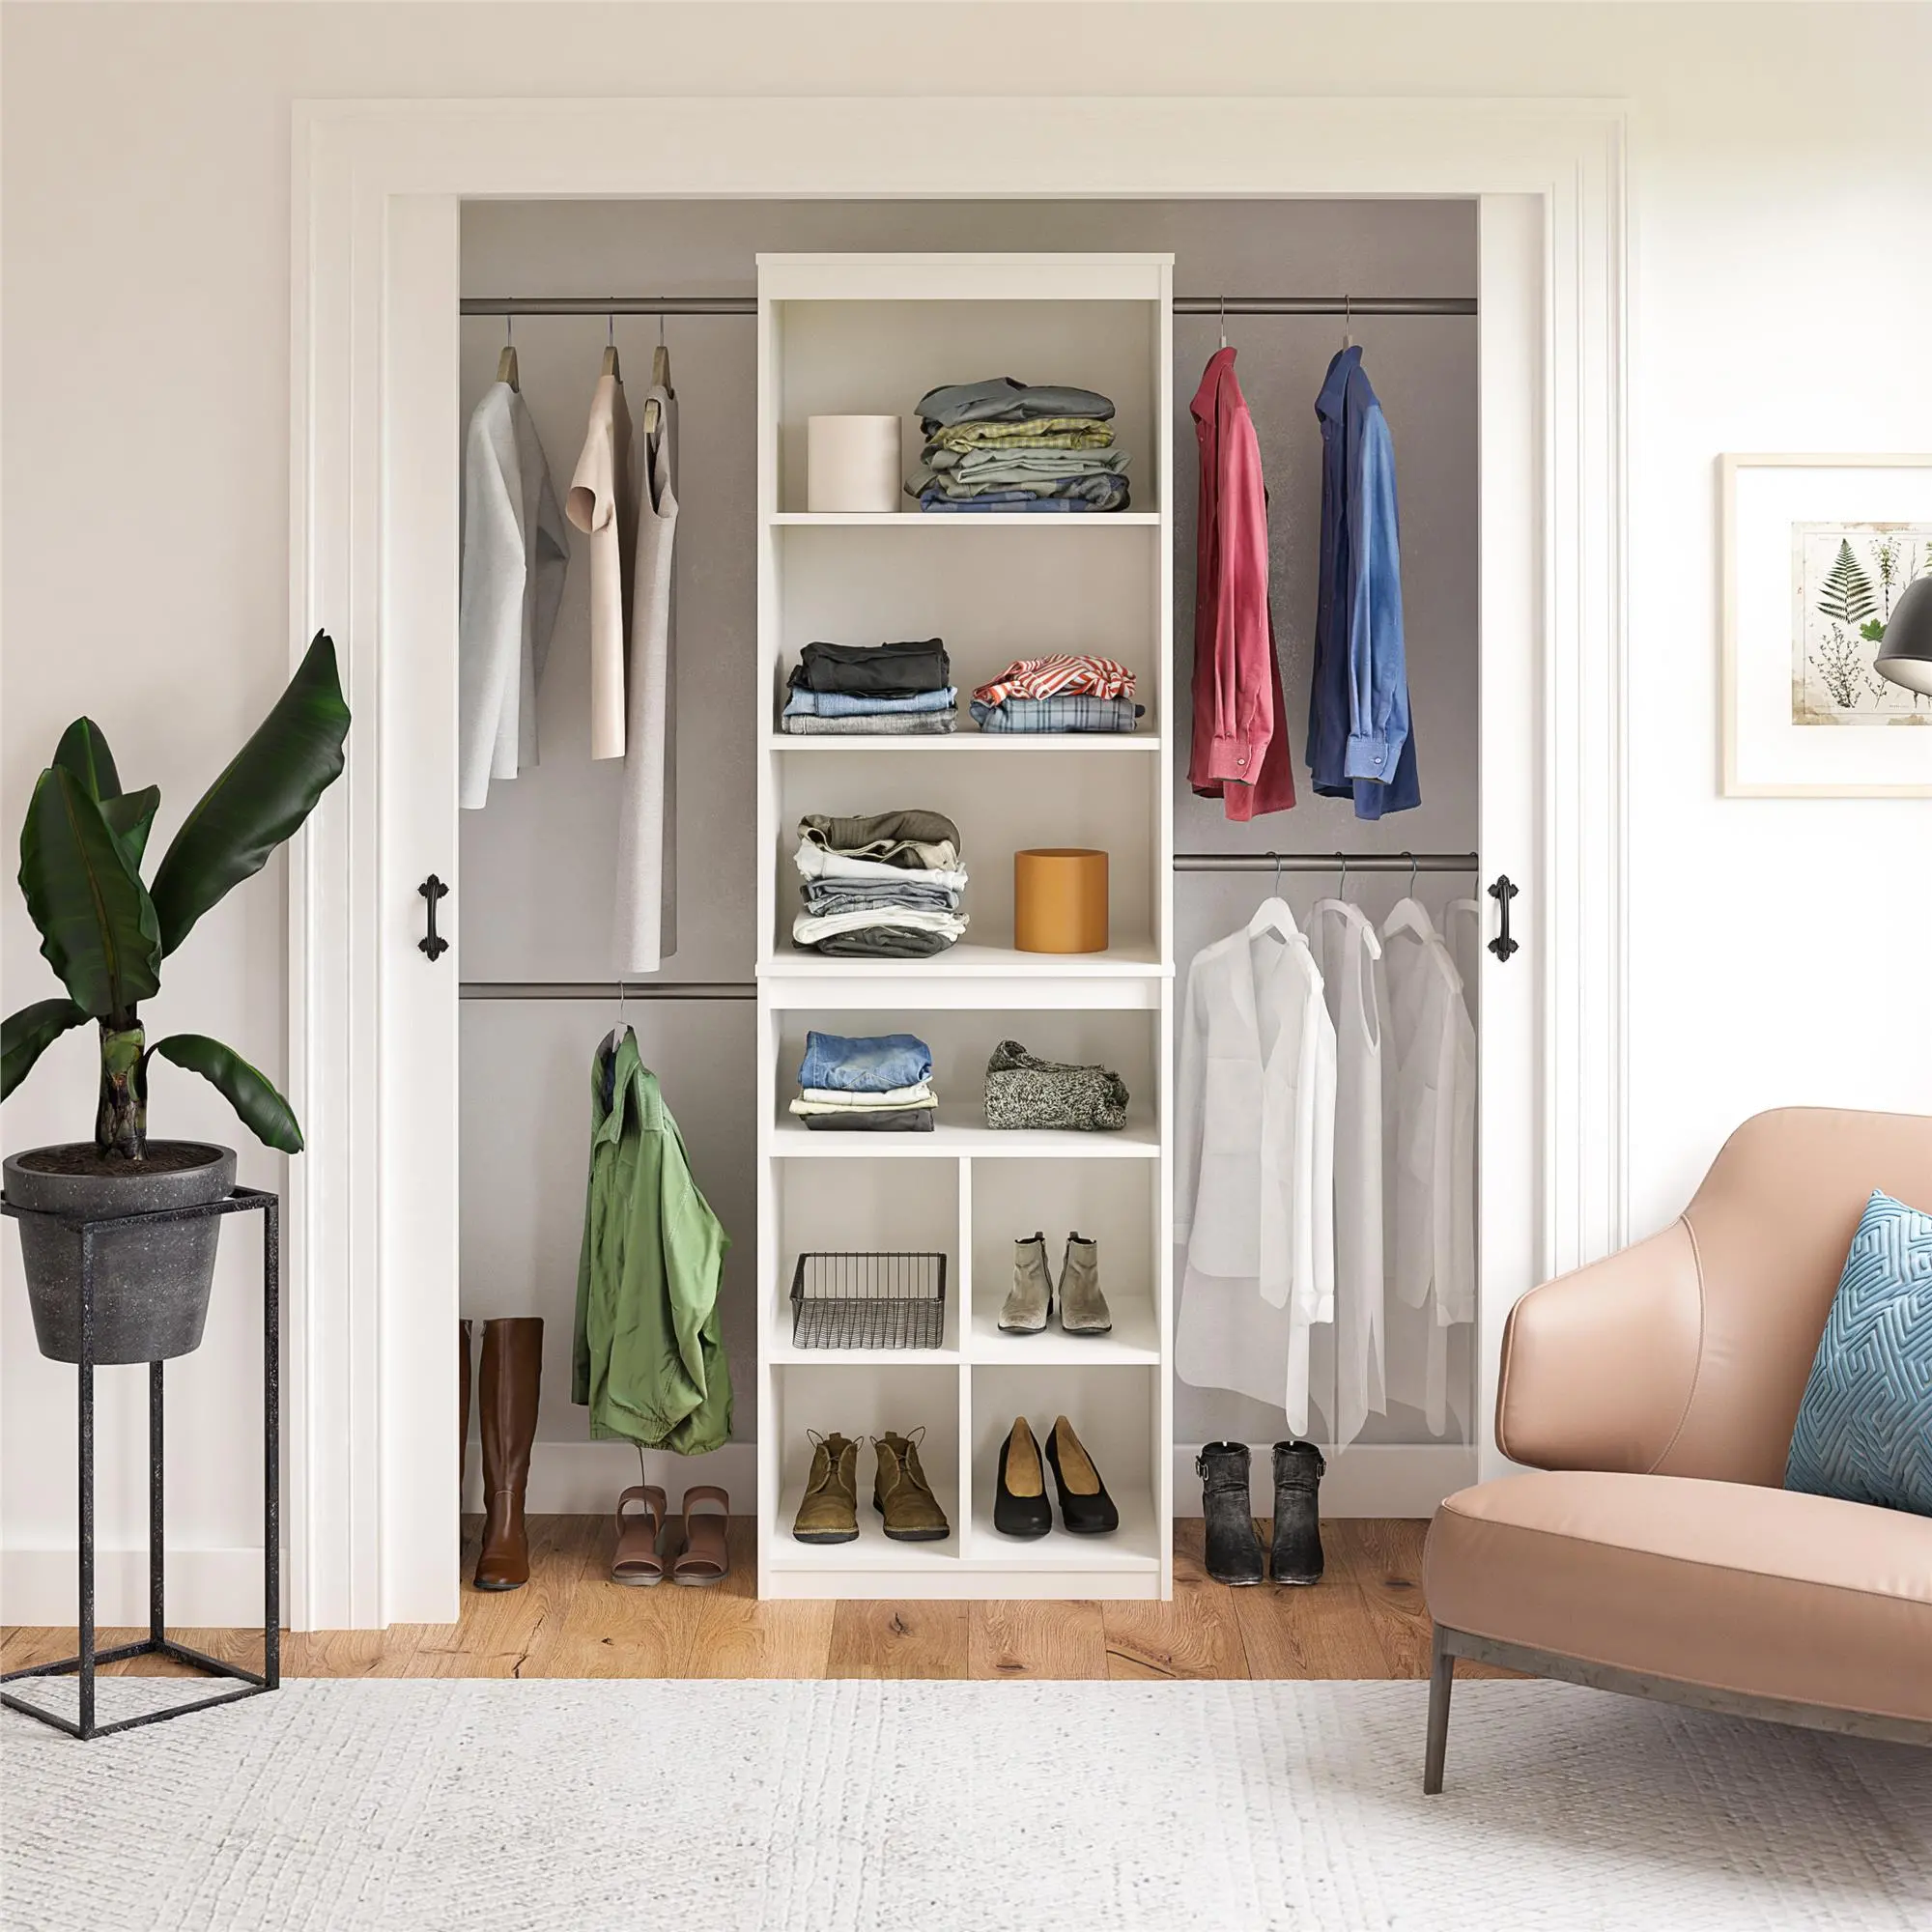 https://static.rcwilley.com/products/112858643/Graham-White-Closet-Storage-System-rcwilley-image1.webp